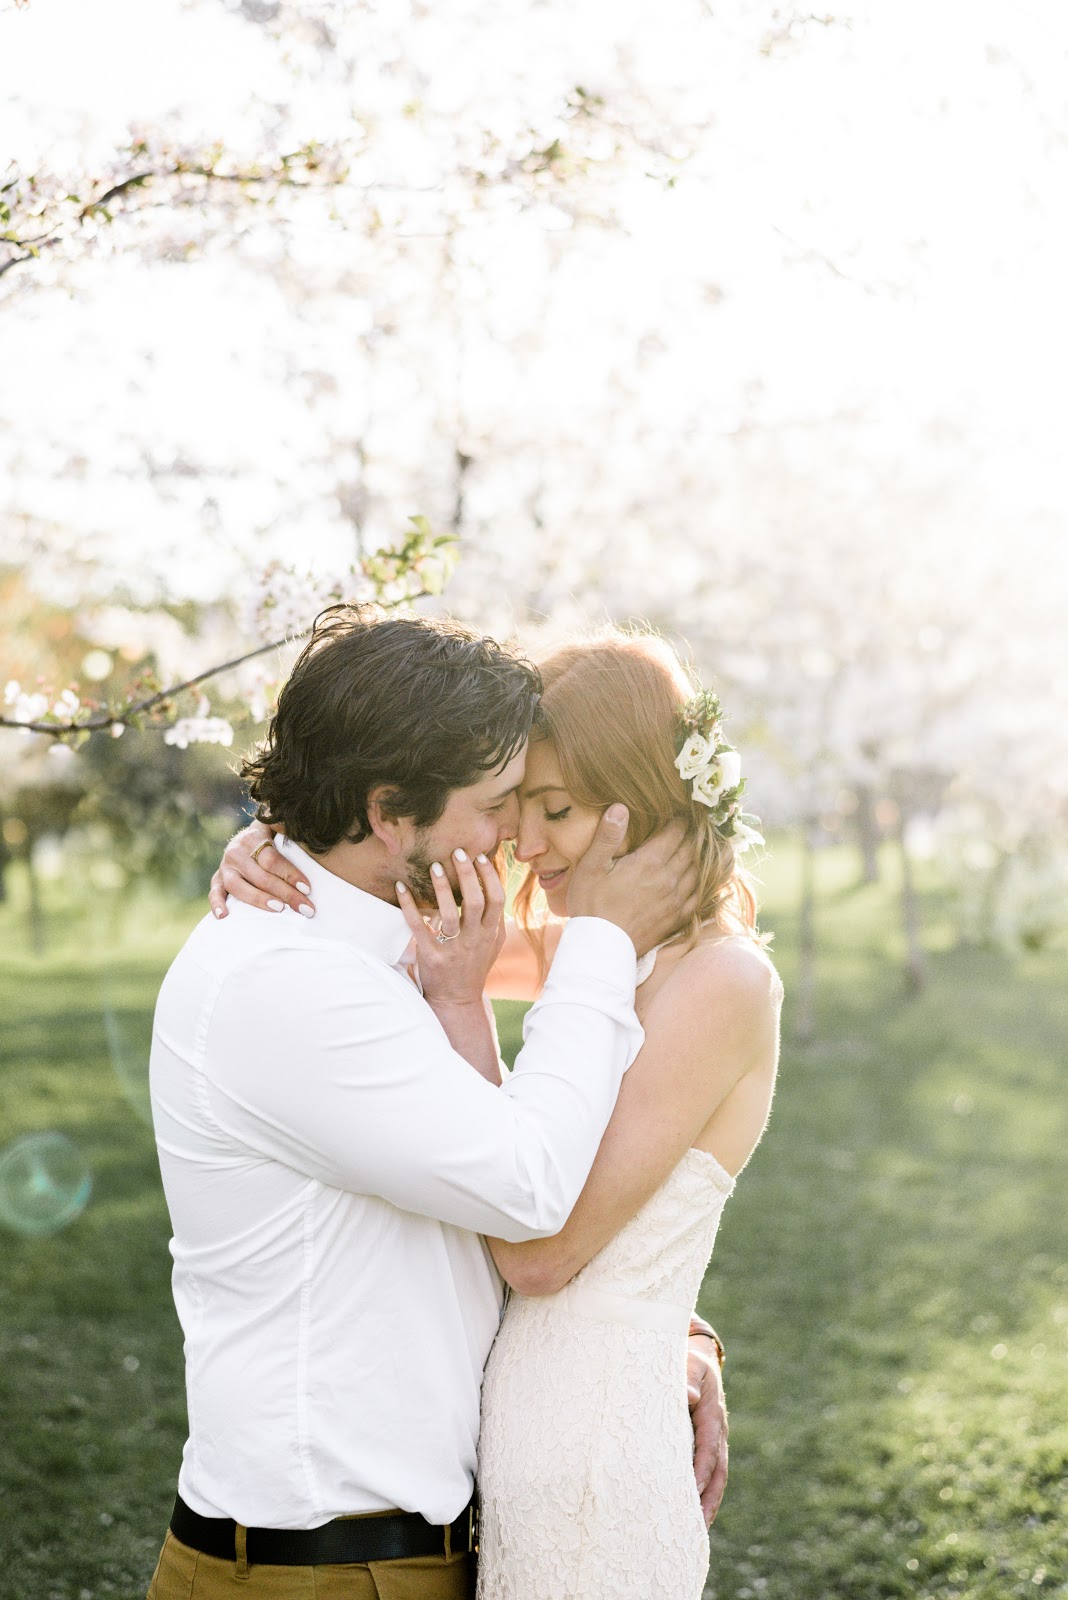 Gabriella and Brandon, Pastels & Pastries engagement, Toronto Engagement Shoot, Trinty Bellwoods Engagement, Cherry Blossom Engagement Shoot, how to plan an engagement shoot, Alix Gould Photography, lace boho wedding dress, wild north florals crown, Honey lace dress